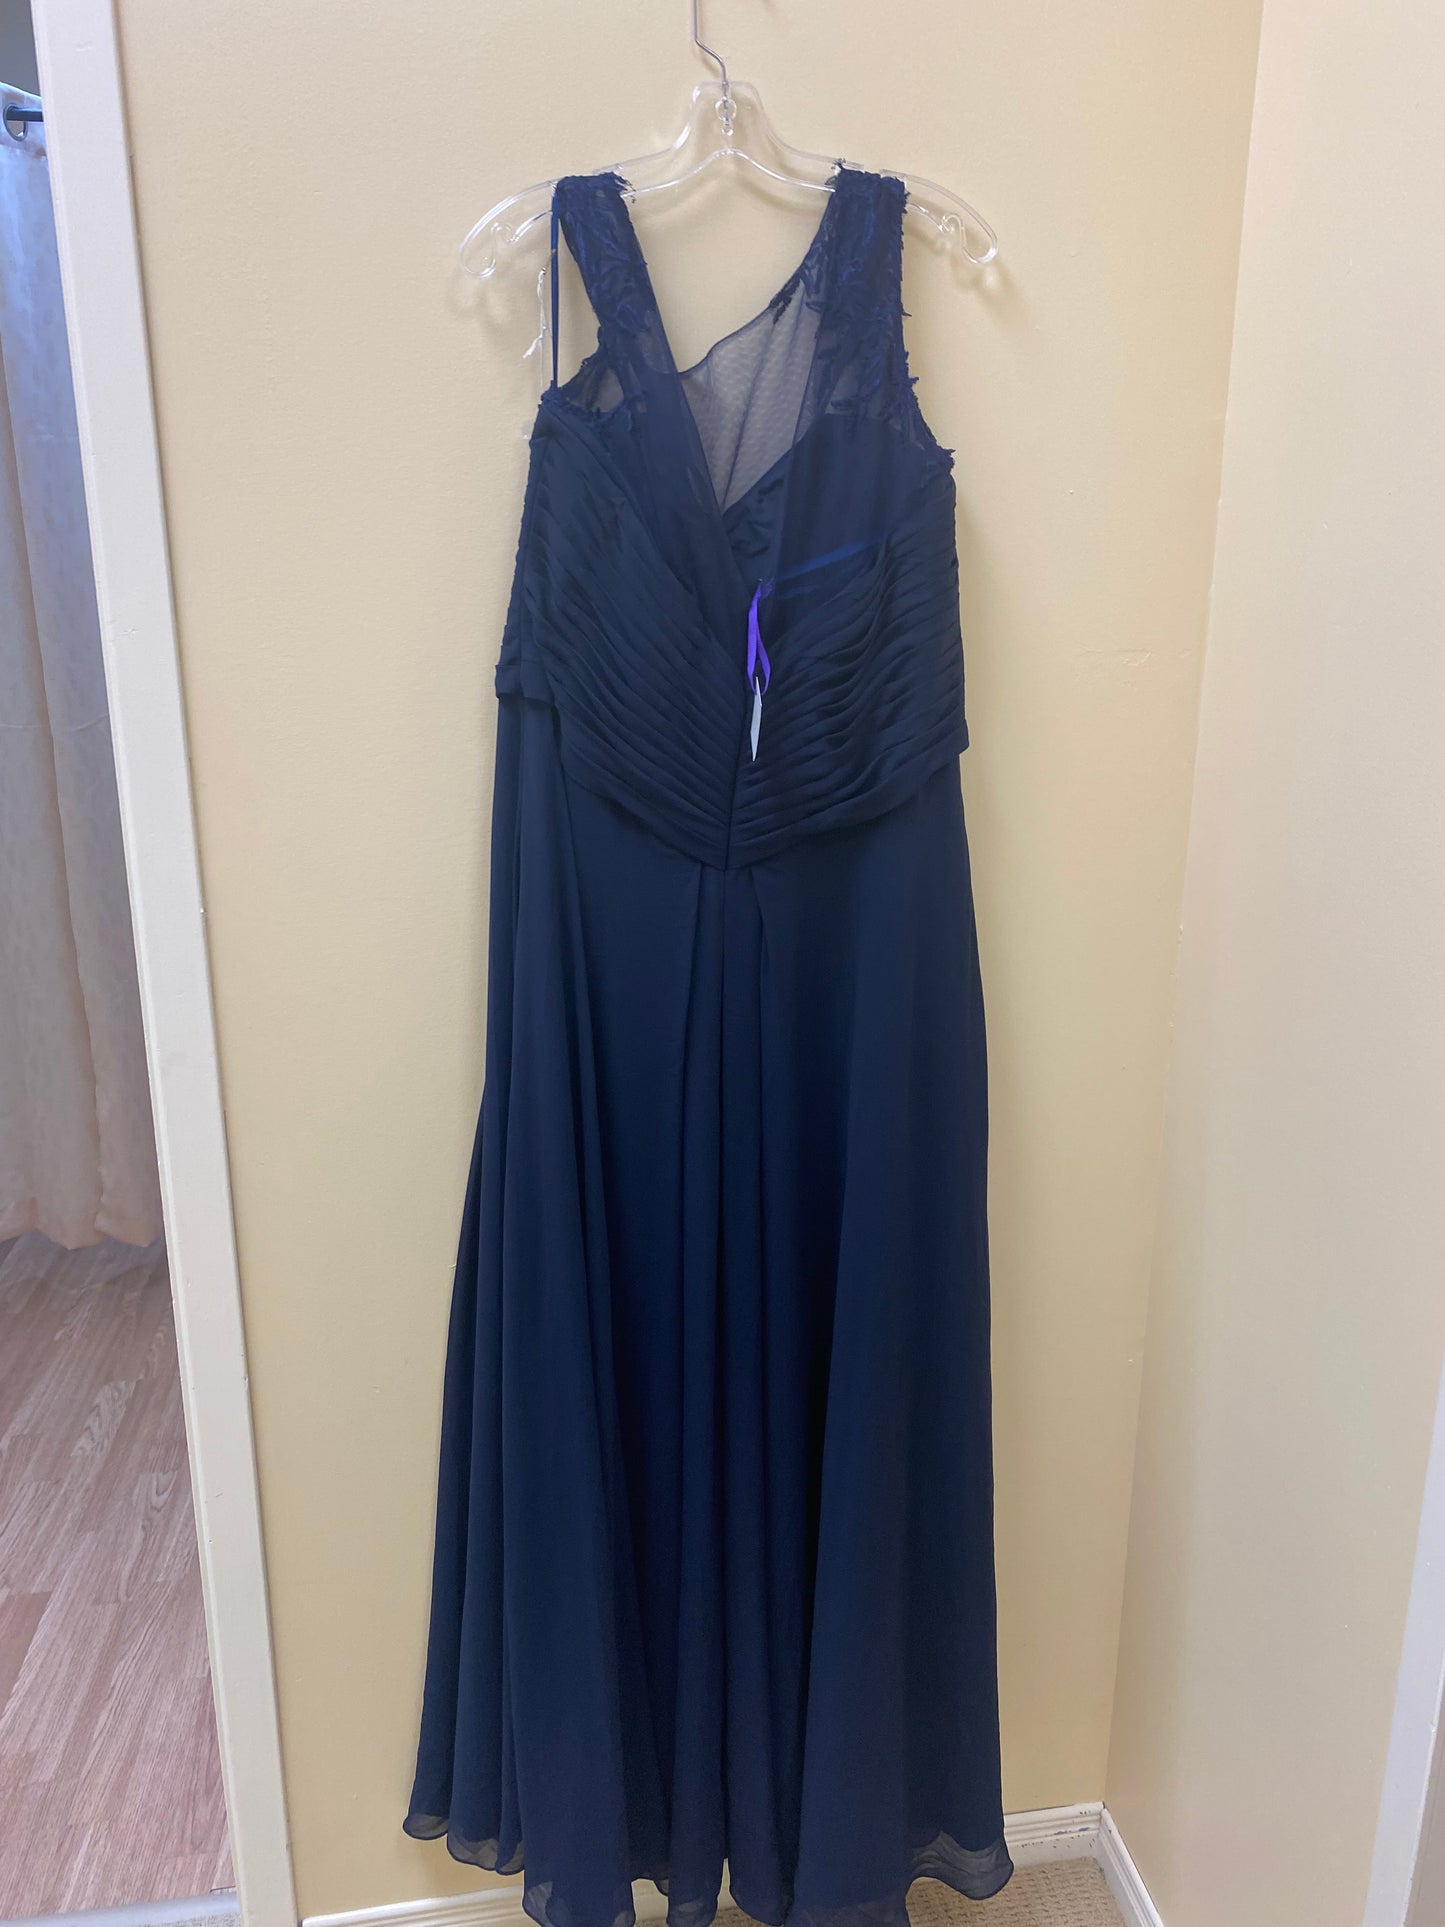 MORI LEE - 106 - Navy Size 22 Long Prom / Mother of the Bride / Bridesmaid Dress